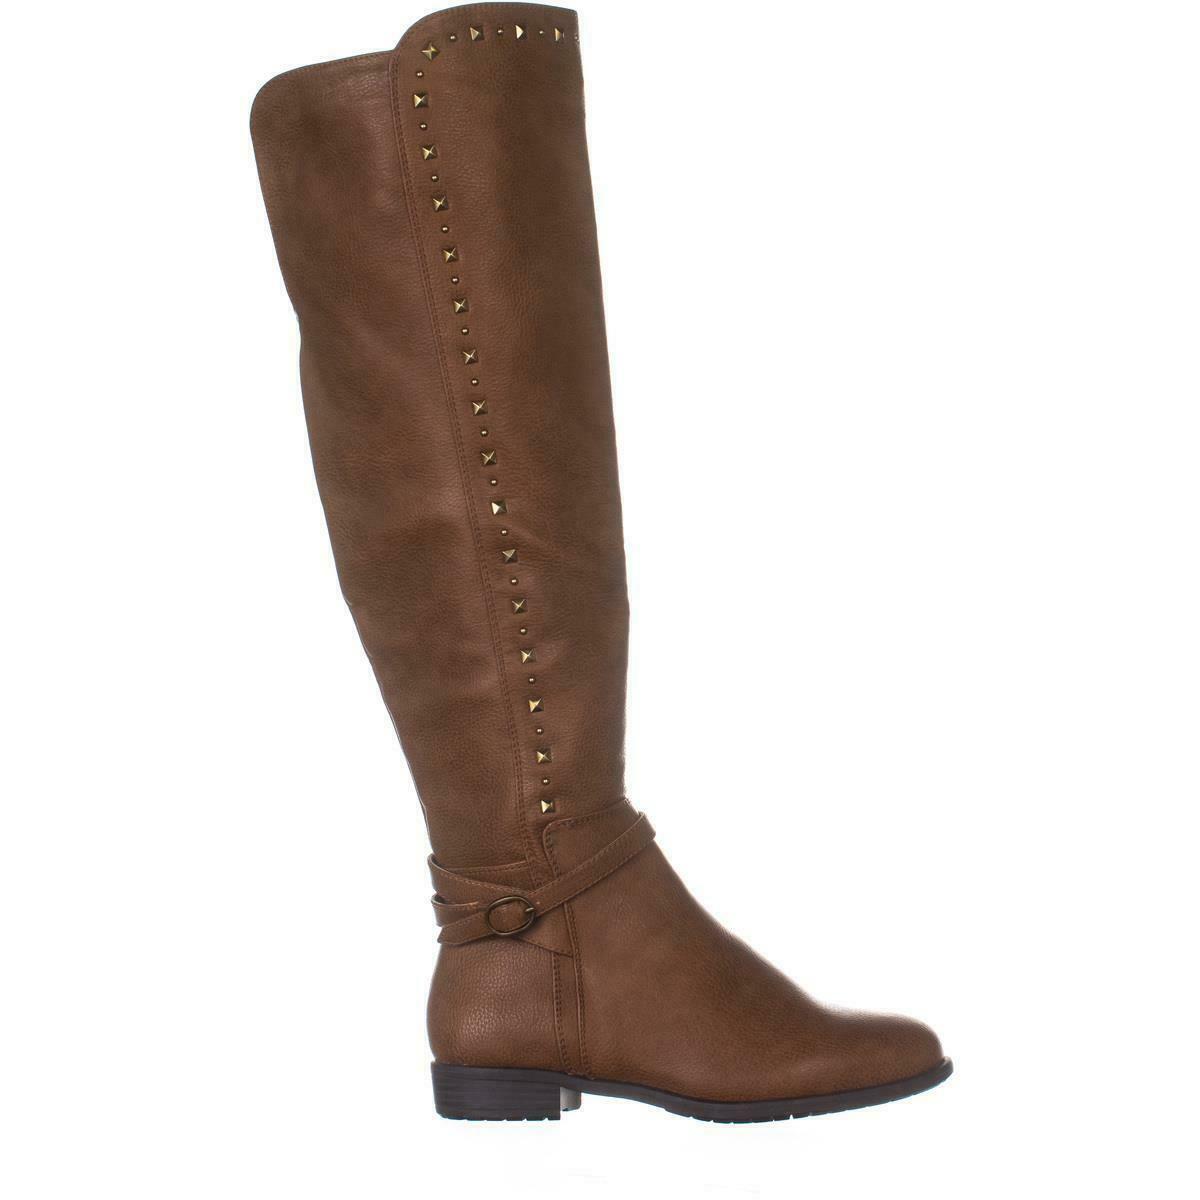 RIALTO Ferrell Knee High Boots, Cognac Smooth, 7 US - Boots